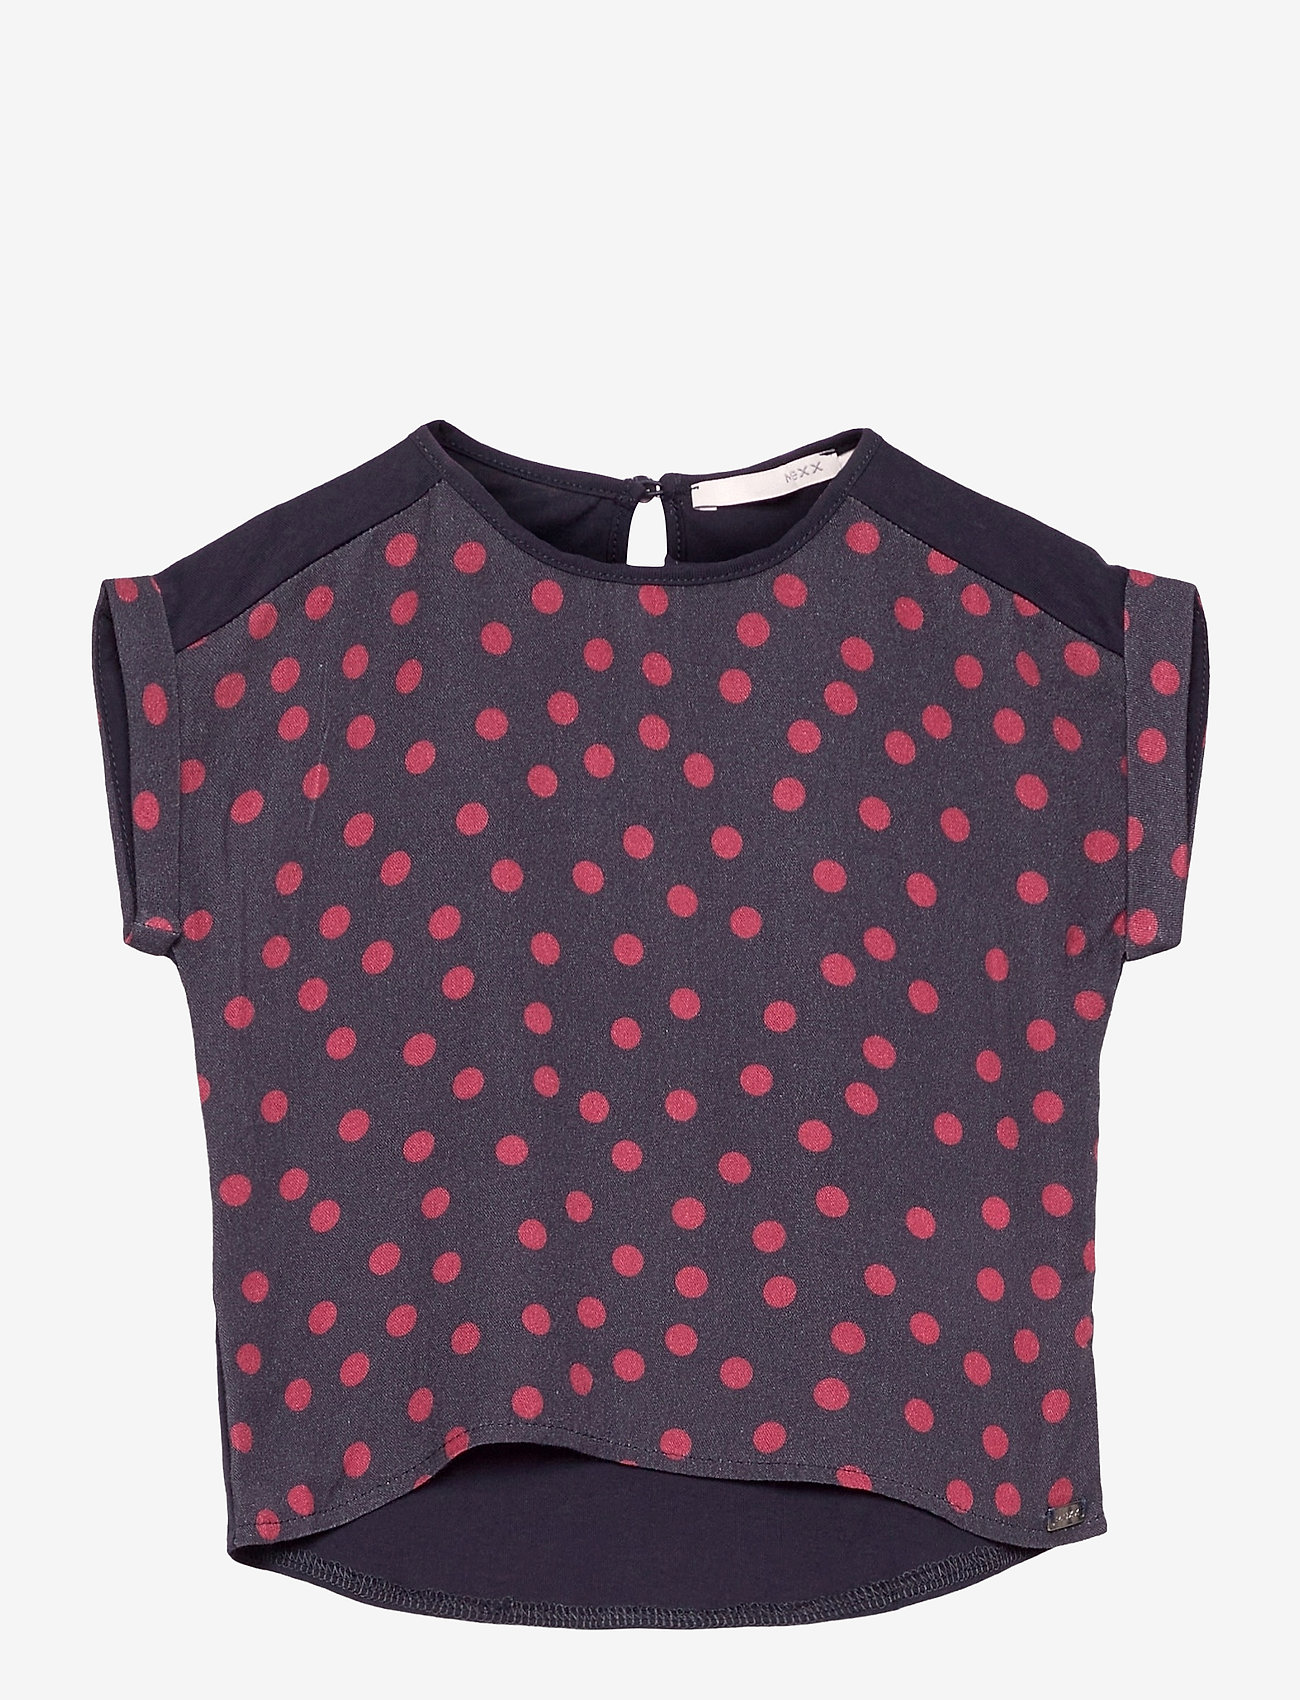 Mexx - Blouse - sommarfynd - dotted - 0